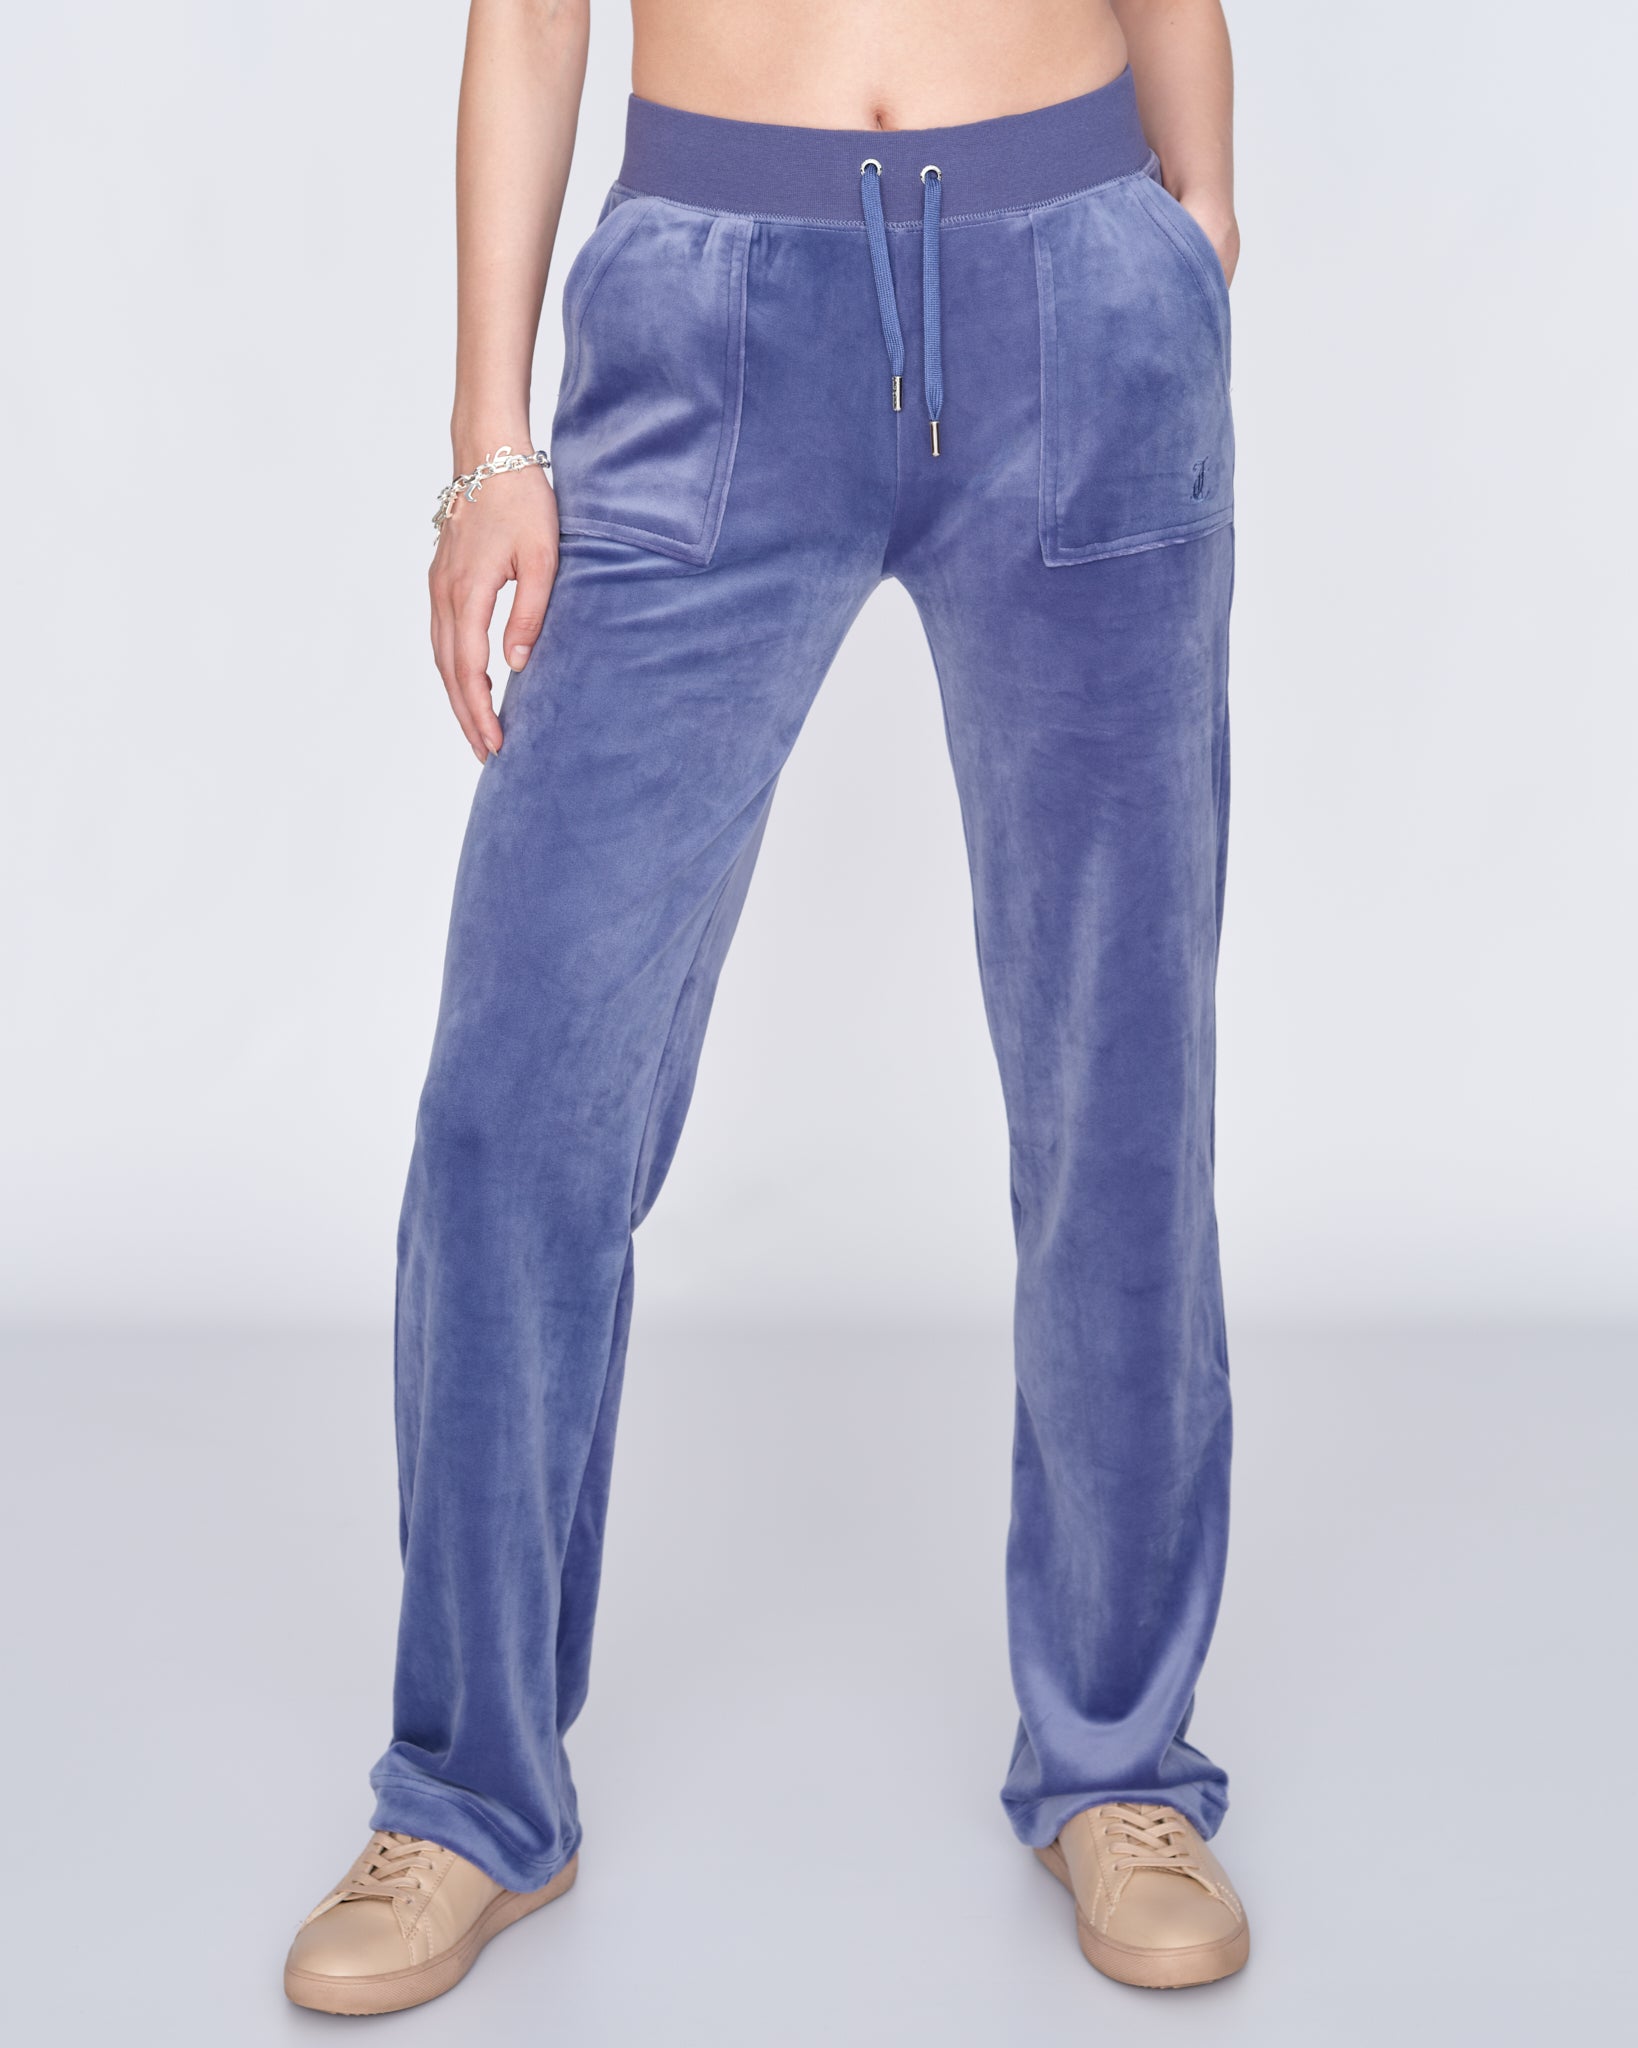 Classic Velour Del Ray Pant Grey Blue - Juicy Couture Scandinavia